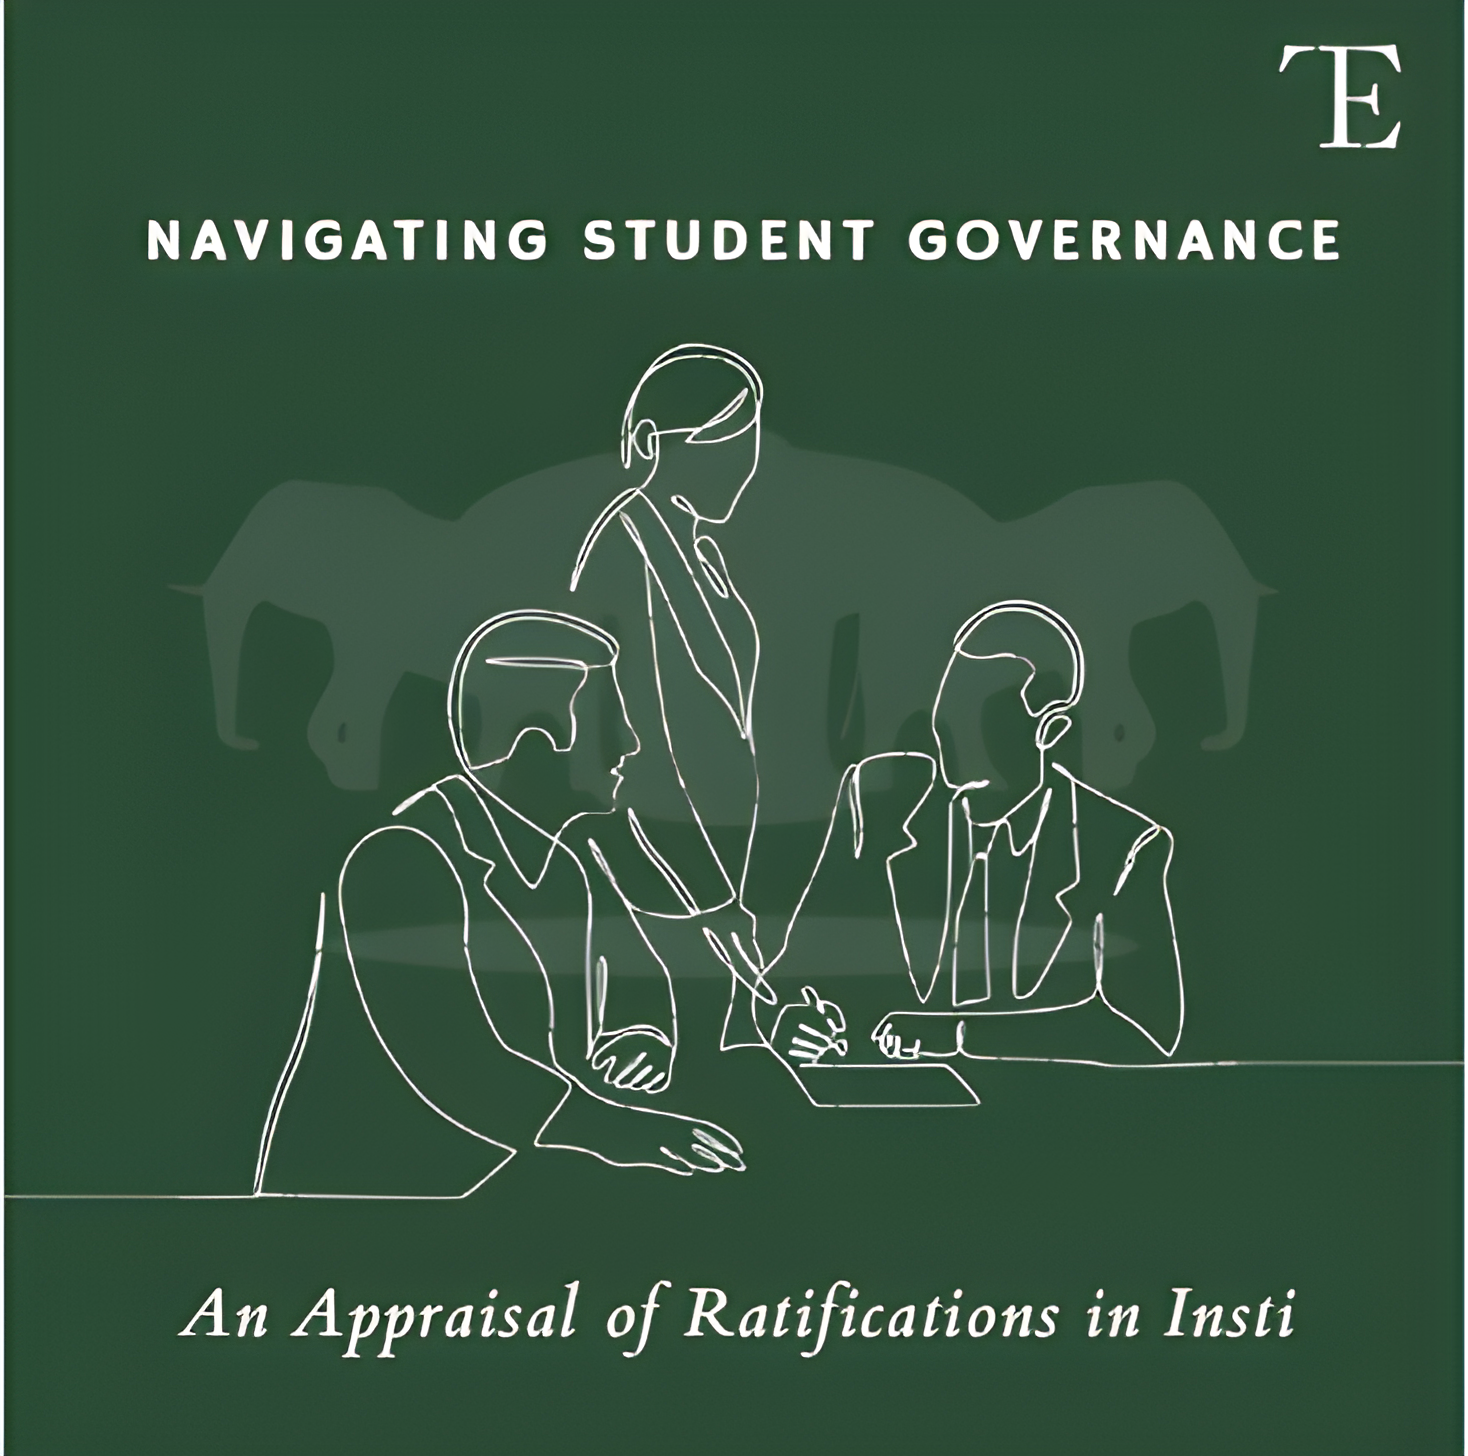 Navigating Student Governance: An Appraisal of Ratifications in Insti